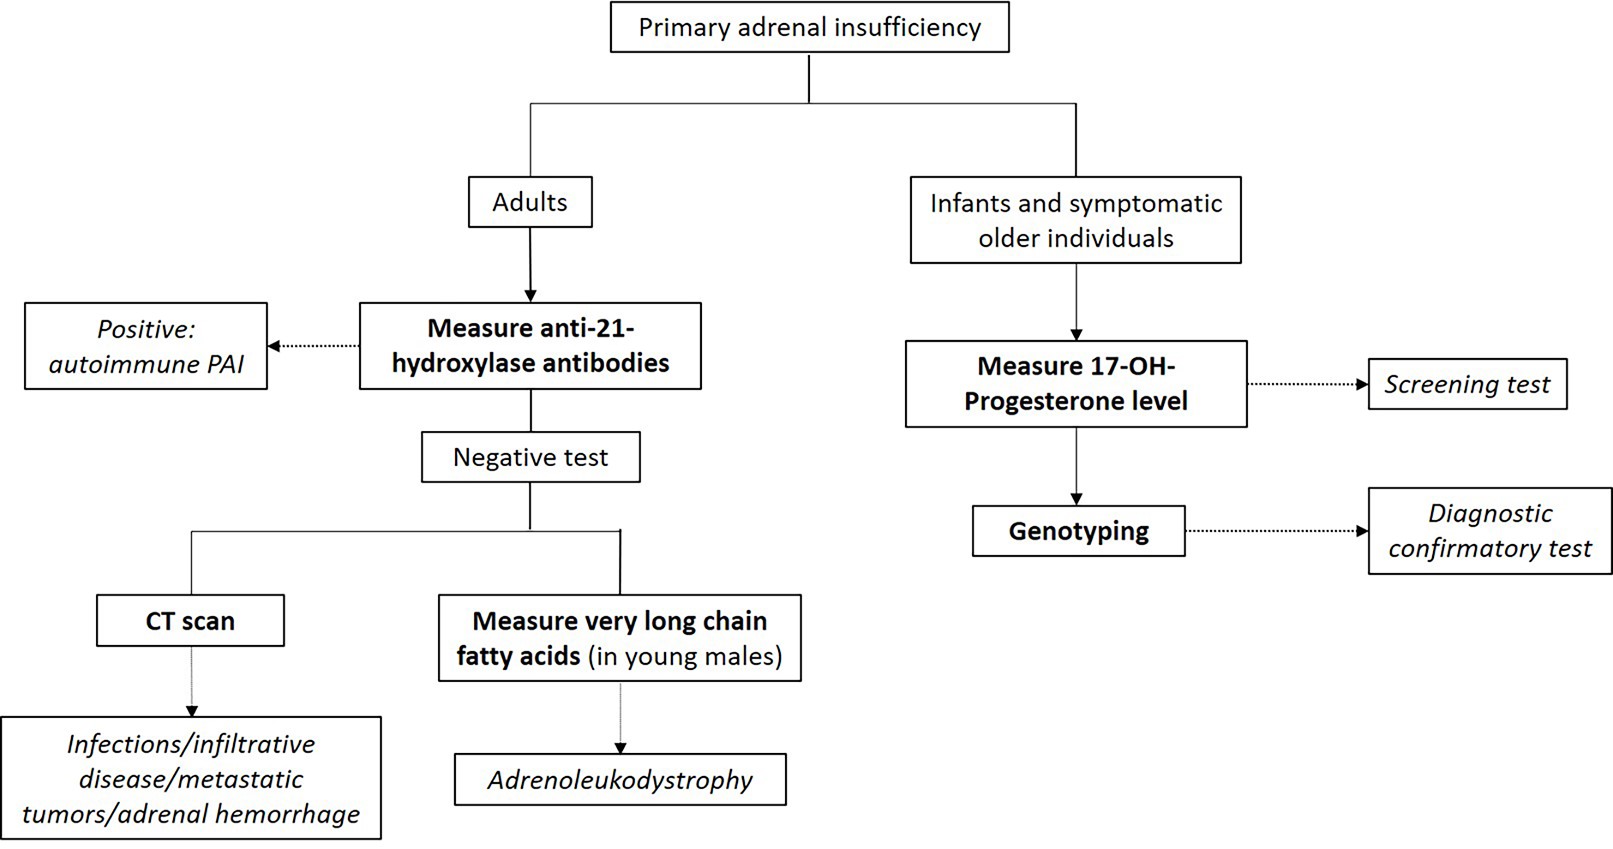 Primary adrenal insufficiency testing flowchart